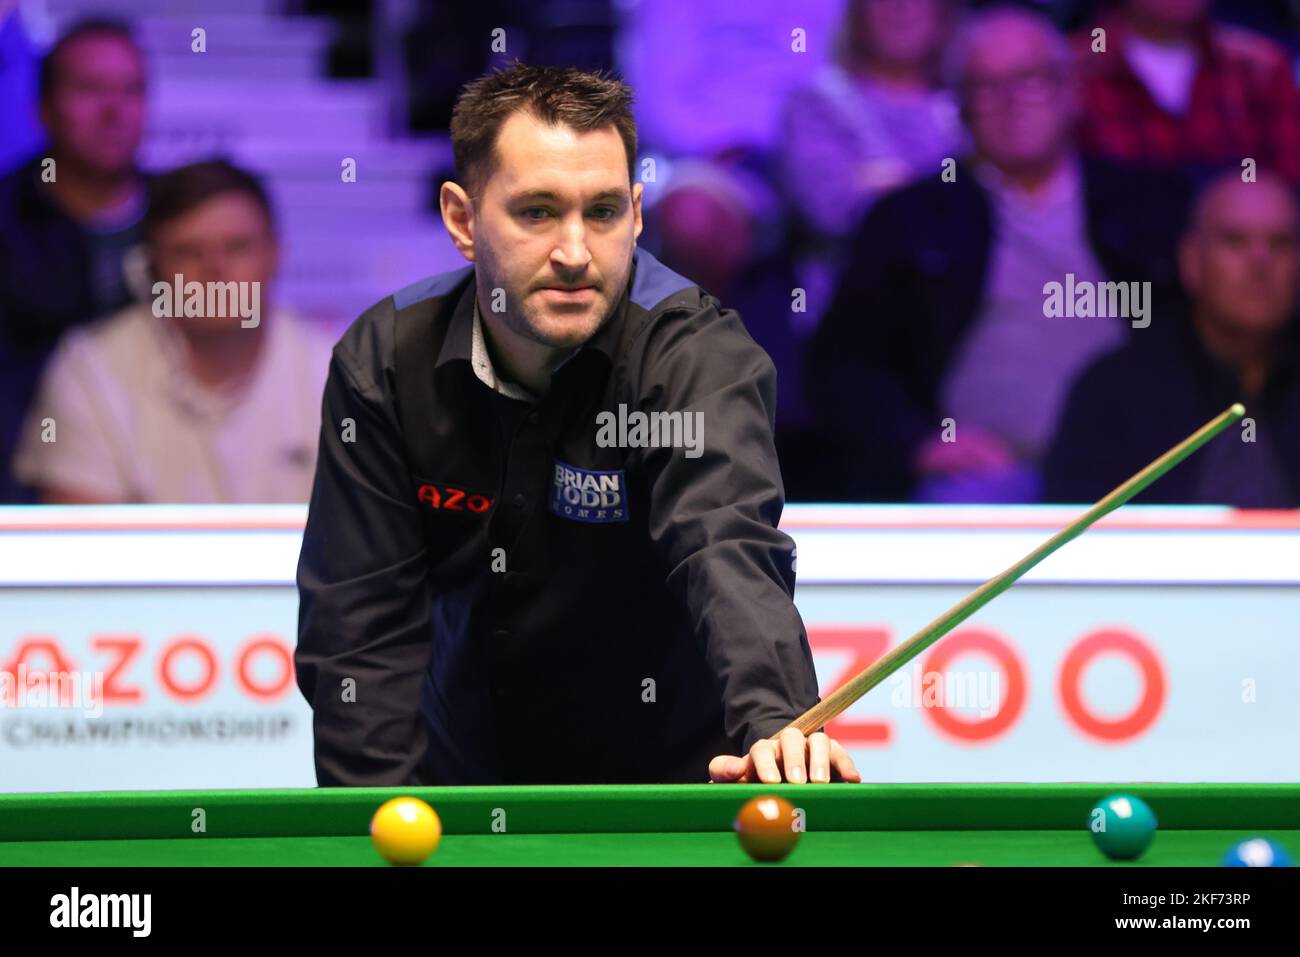 Englands Tom Ford during day five of the Cazoo UK Snooker Championship at the York Barbican